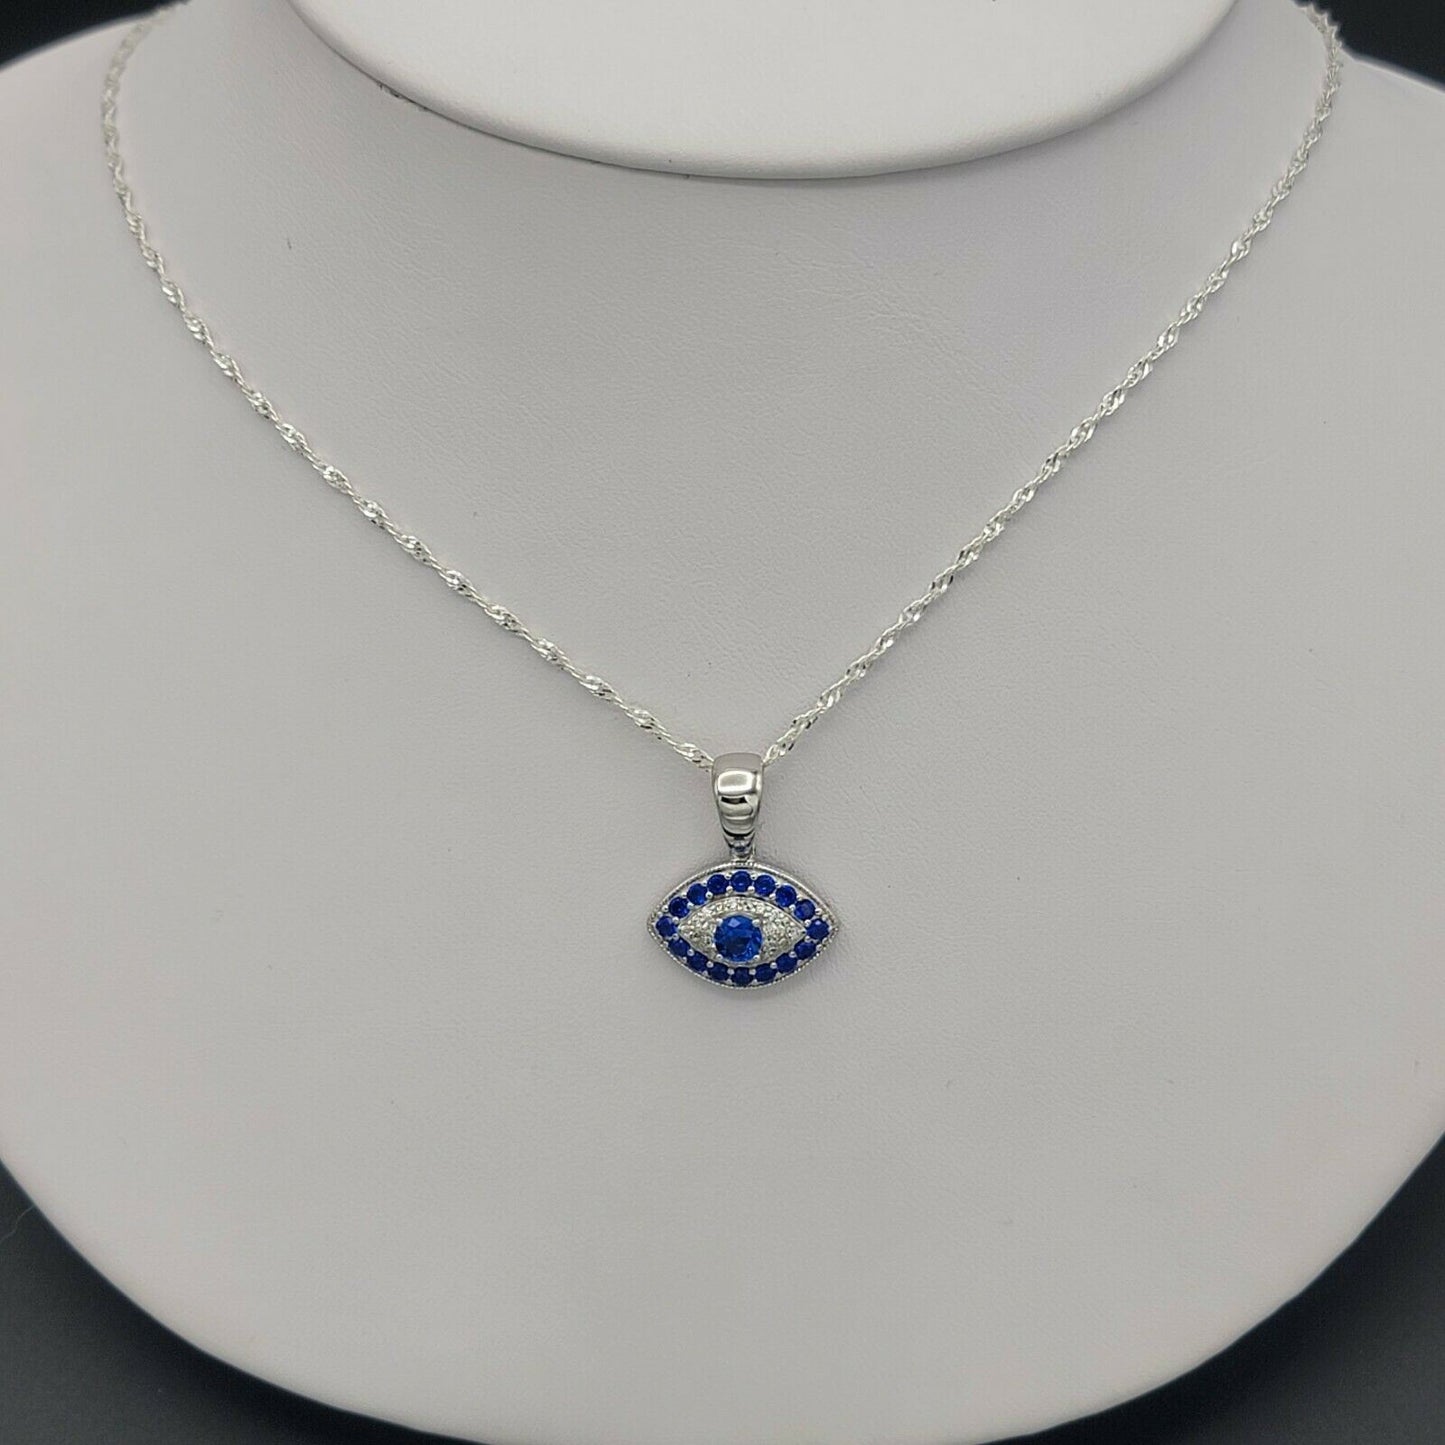 Solid 925 Sterling Silver. CZ Blue Eye Pendant Necklace.